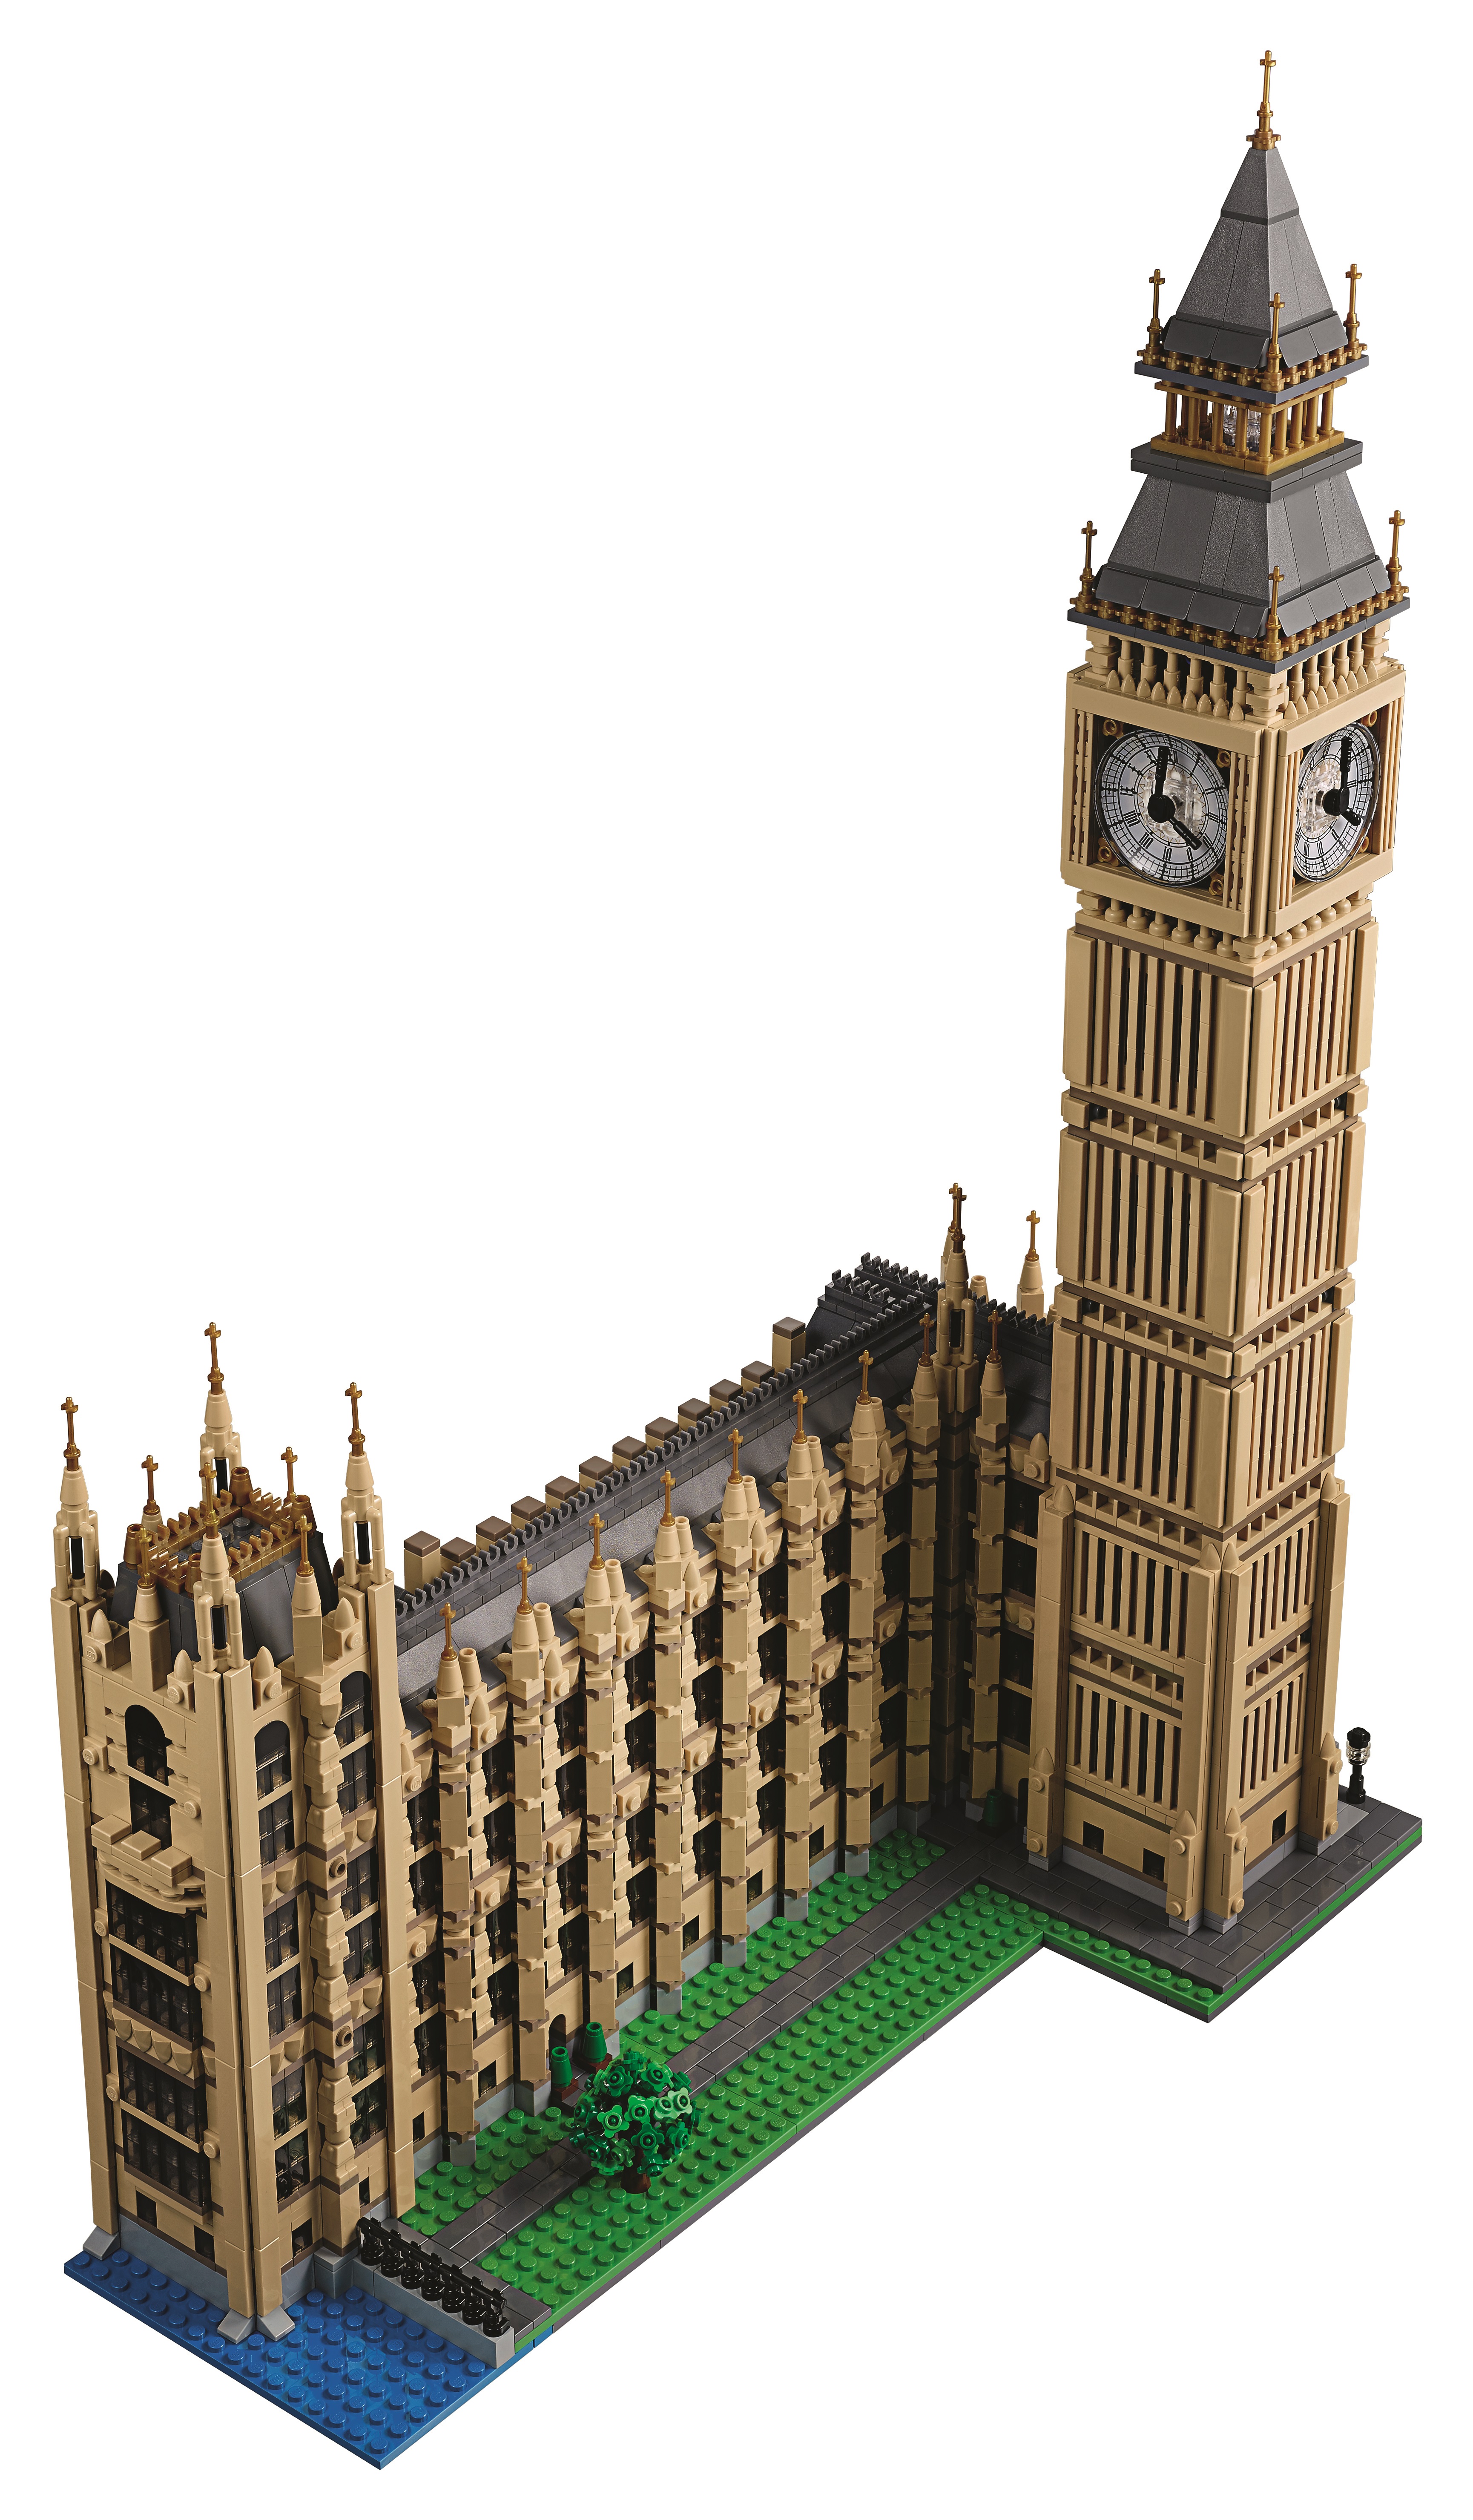 Official release details and photos of LEGO 10253 Big Ben - Jay's